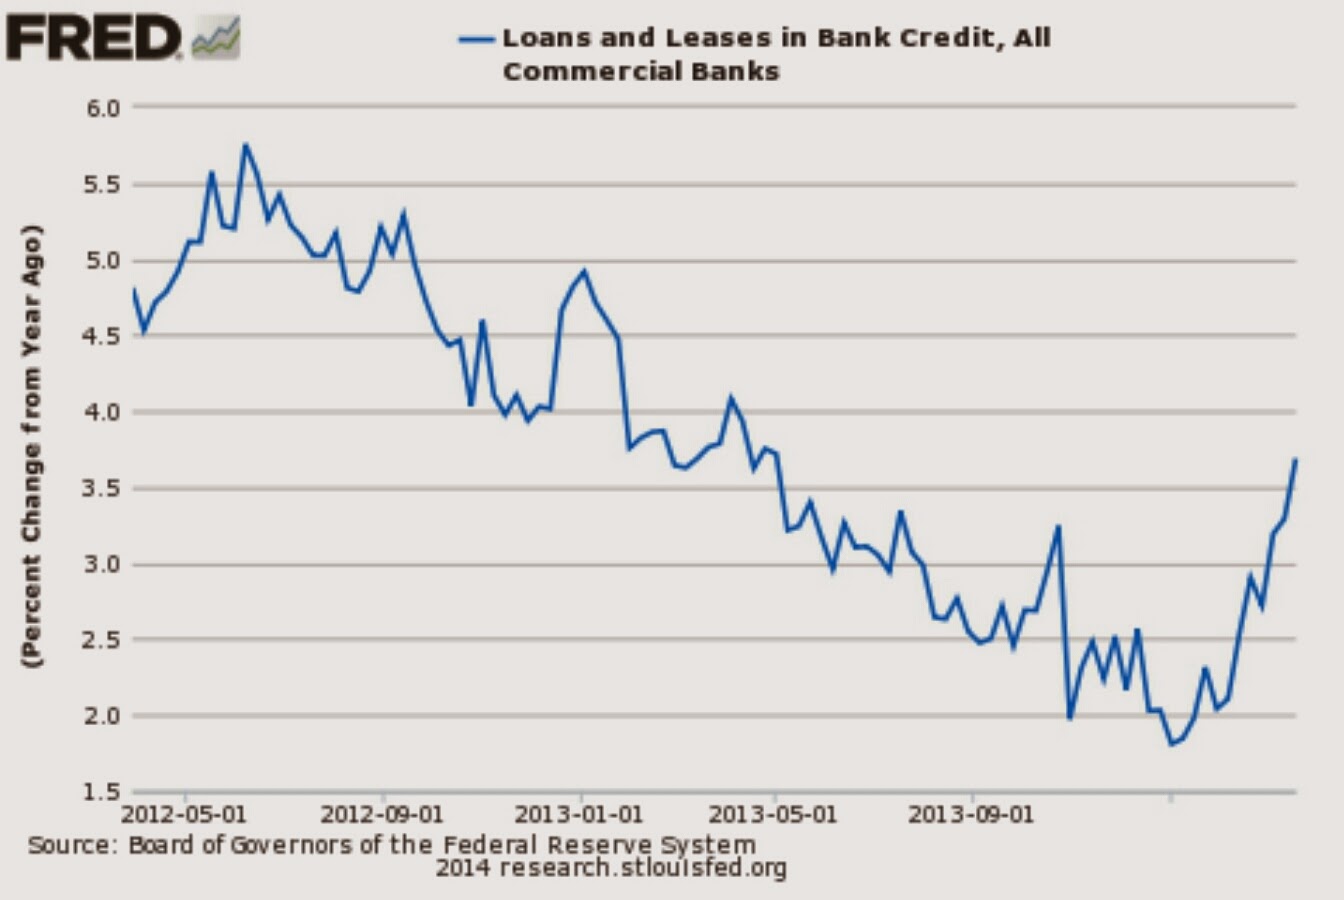 Loans and leases